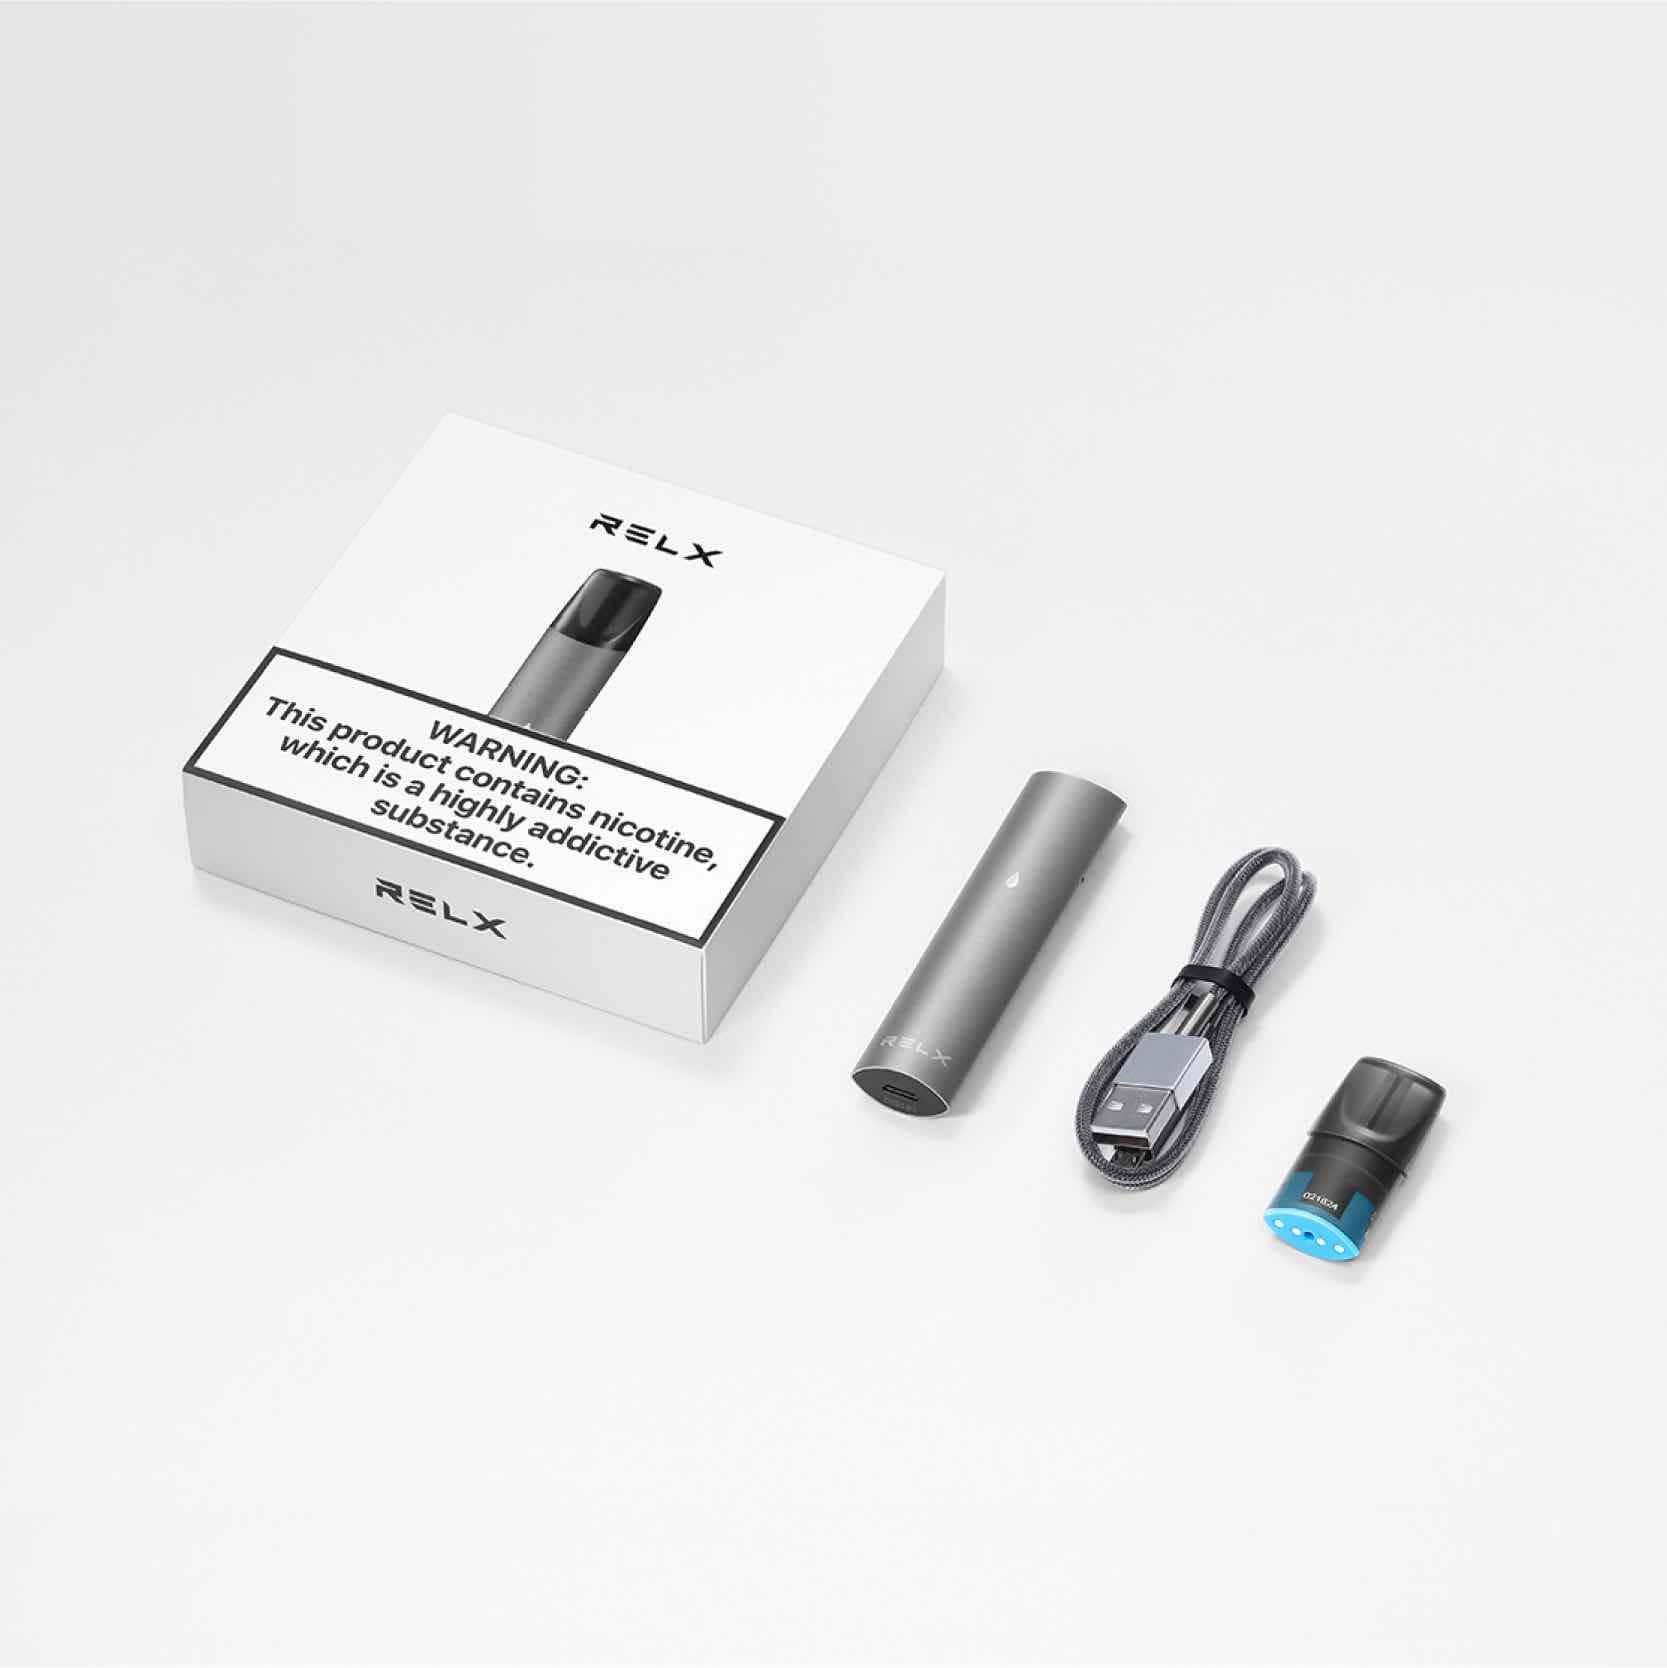 I-qos and Pods - IQOS units, RELX starter kits, heets, 3in1 pods